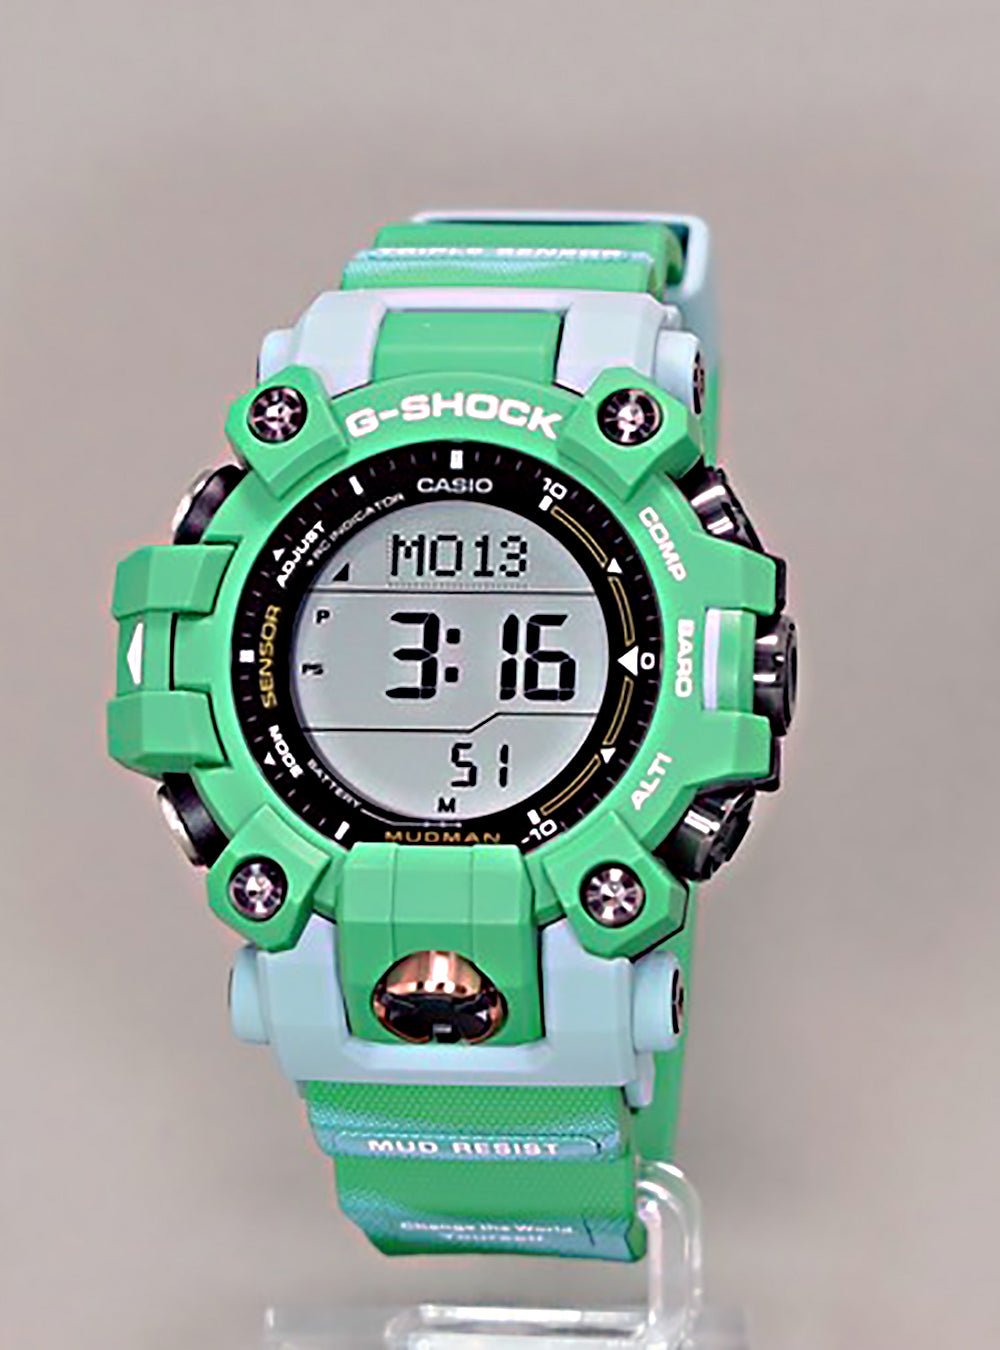 CASIO G-SHOCK EARTHWATCH COLLABORATION MODEL LOVE THE SEA AND THE EARTH MASTER OF G - LAND MUDMAN GW-9500KJ-3JR LIMITED EDITION JDMWRISTWATCHjapan-select